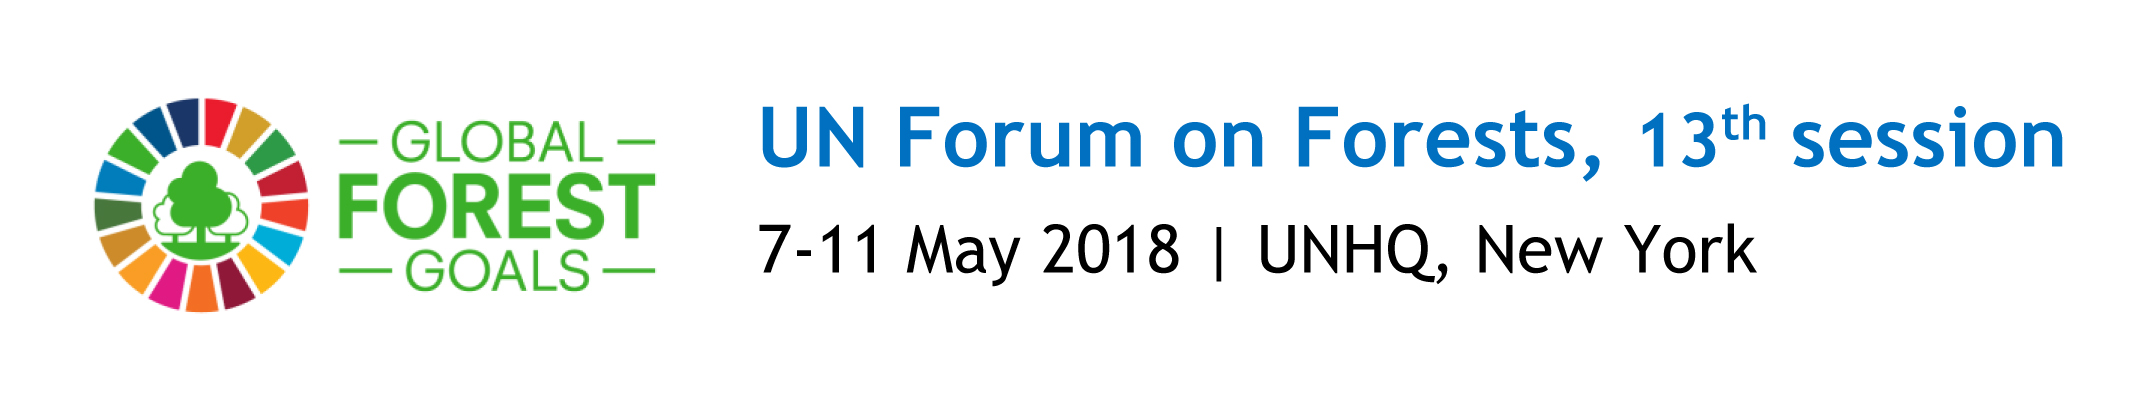 Thirteenth Session of the United Nations Forum on Forests (UNFF13)